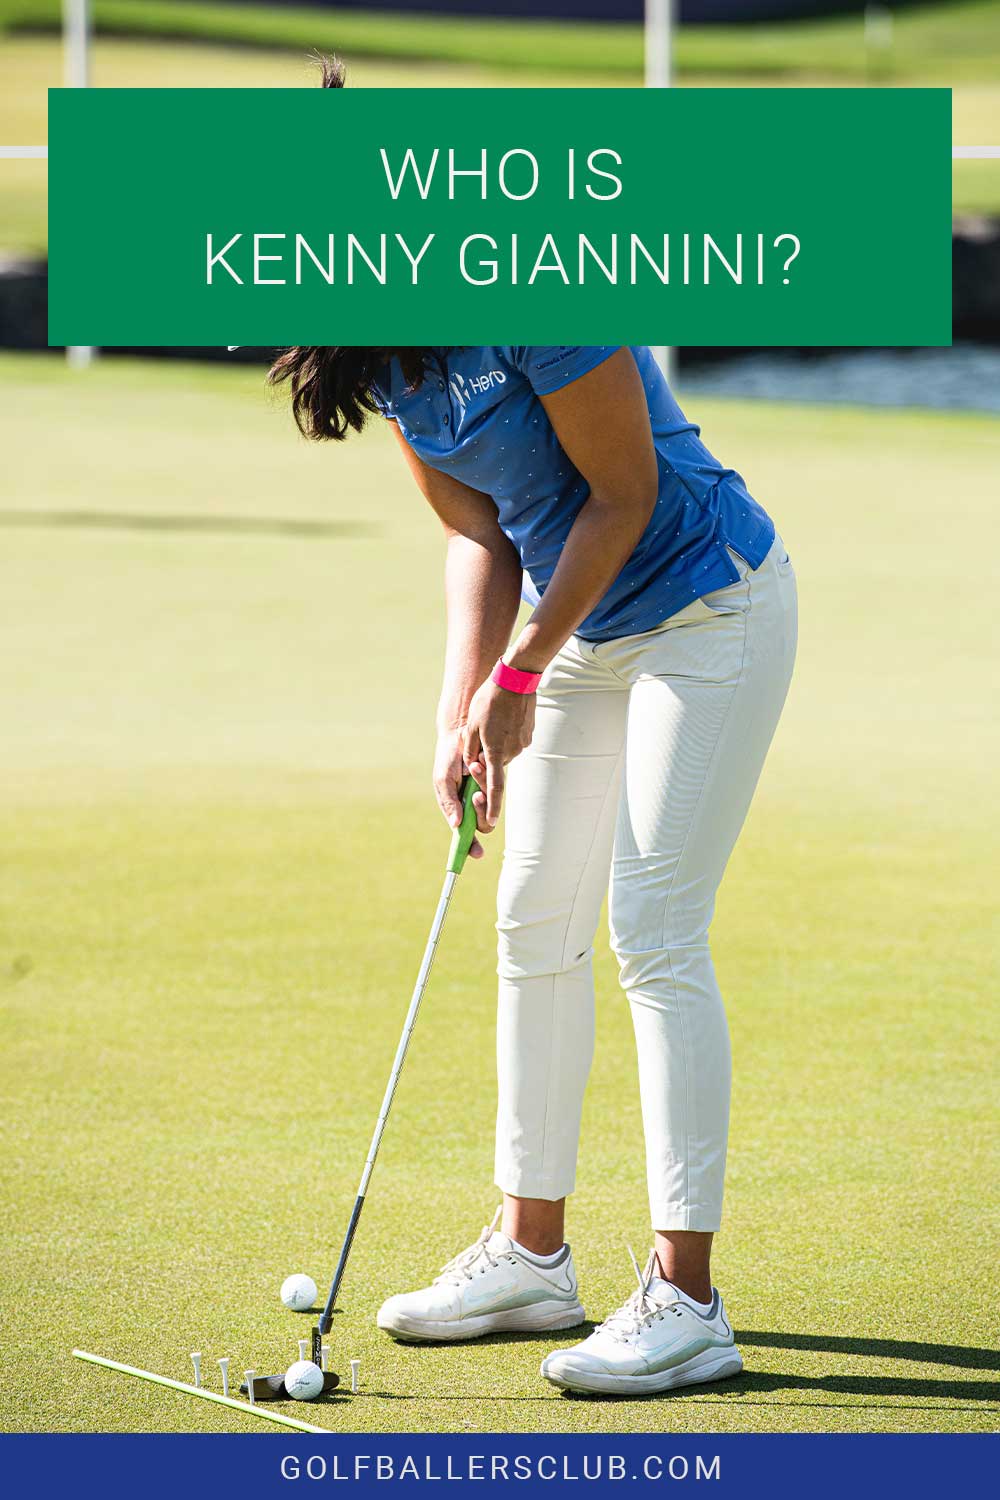 Woman in blue shirt taking a shot - Who is Kenny Giannini?